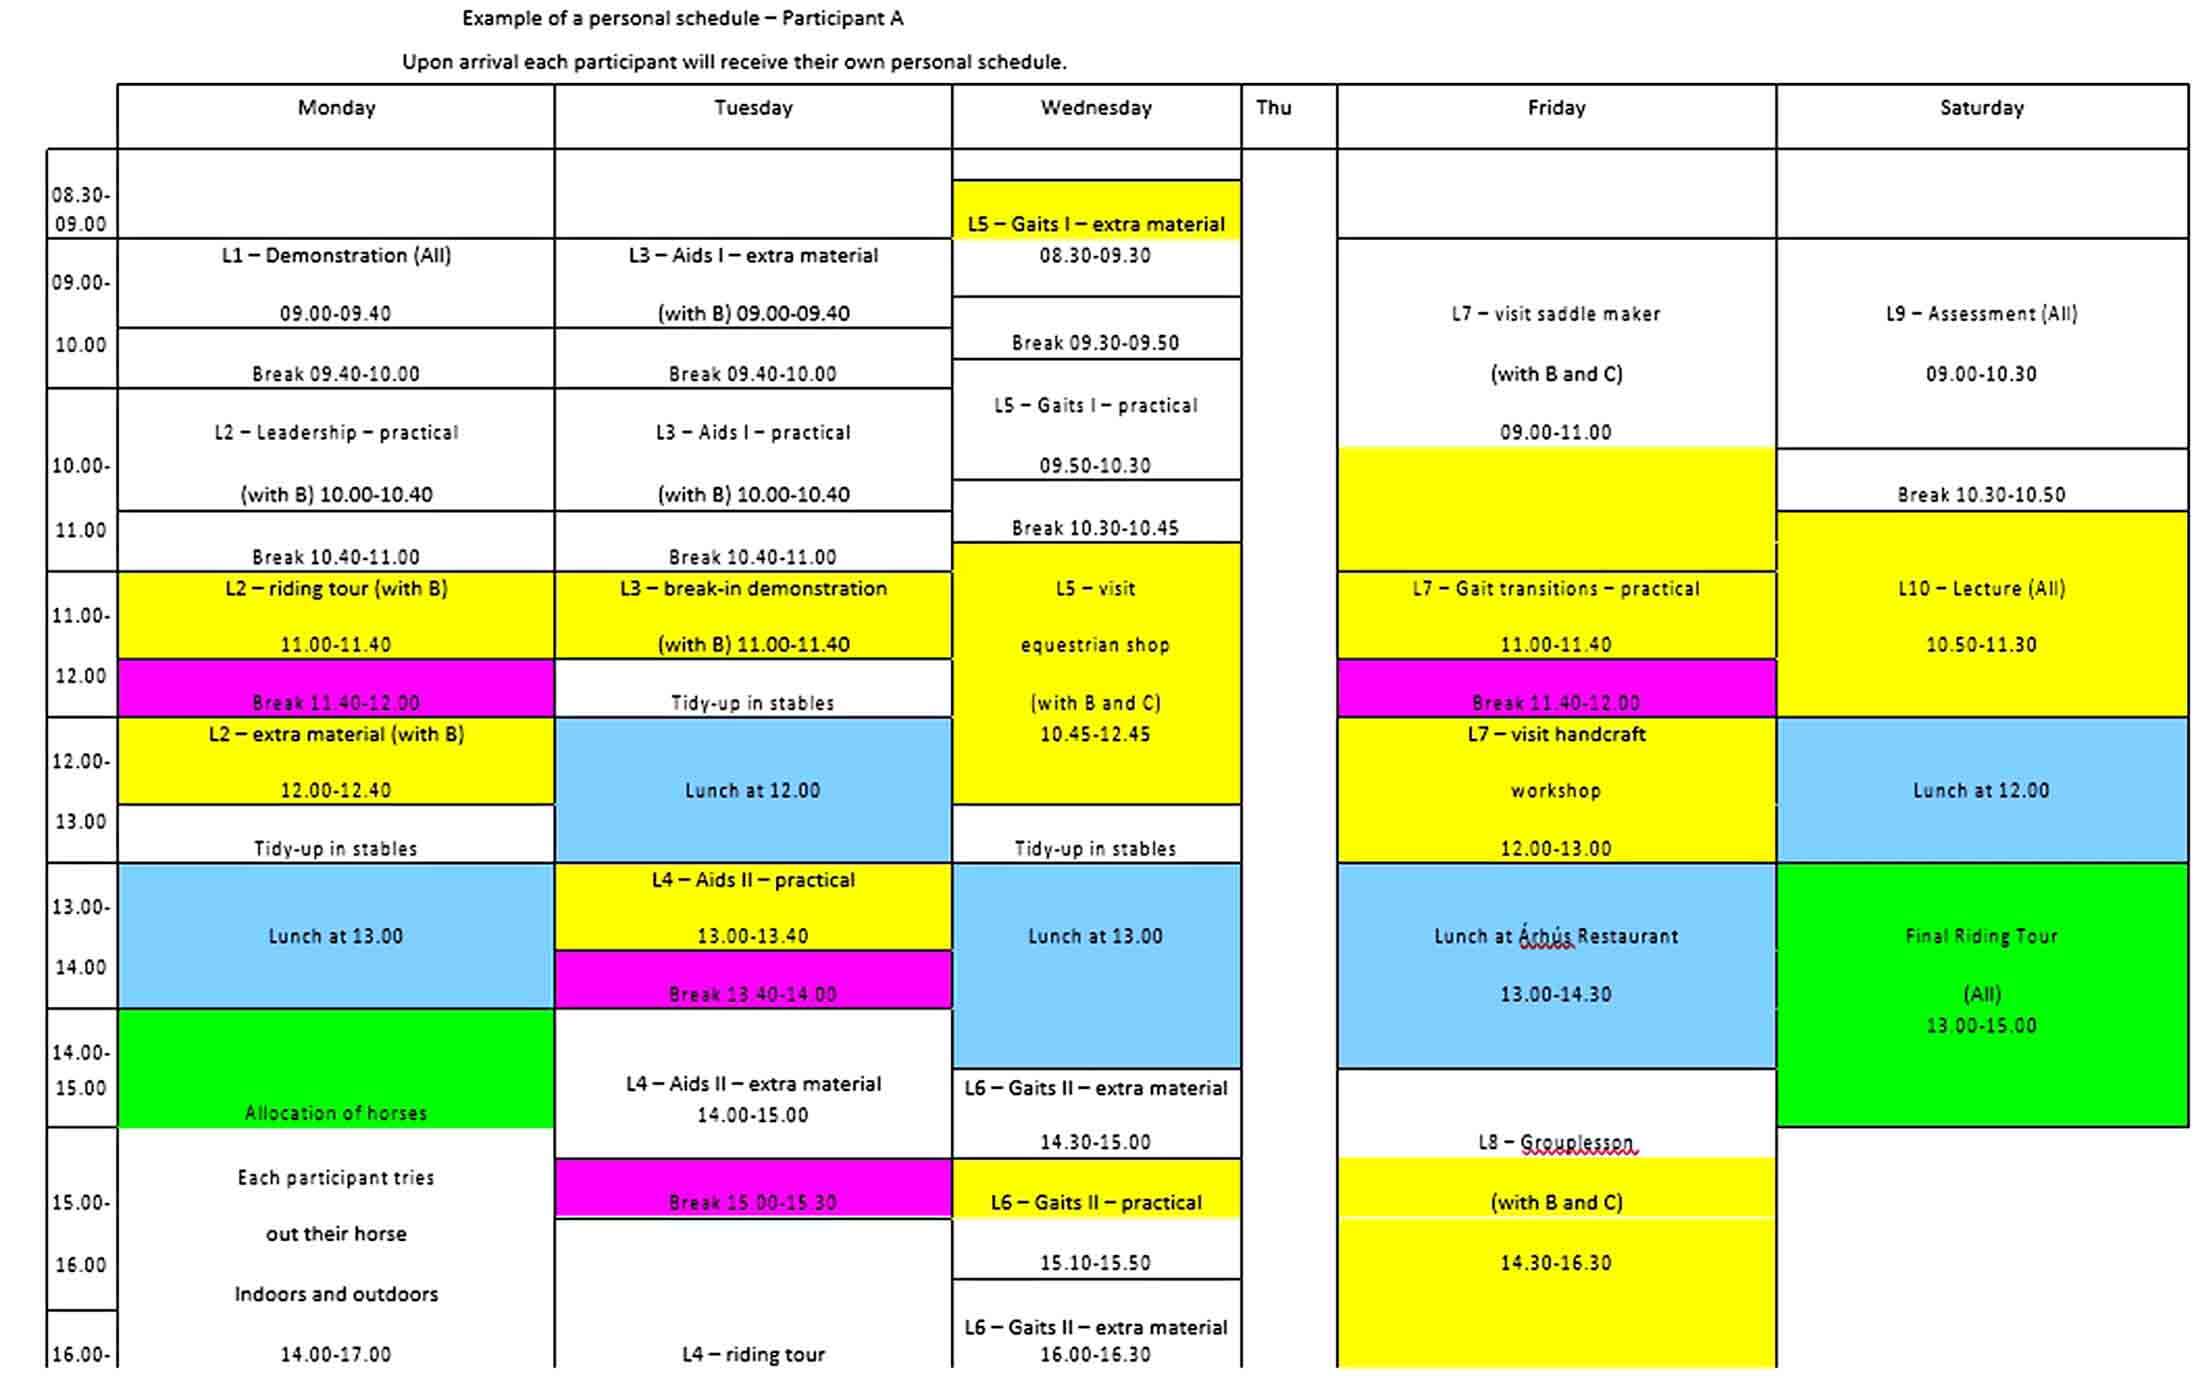 Example of Personal Schedule